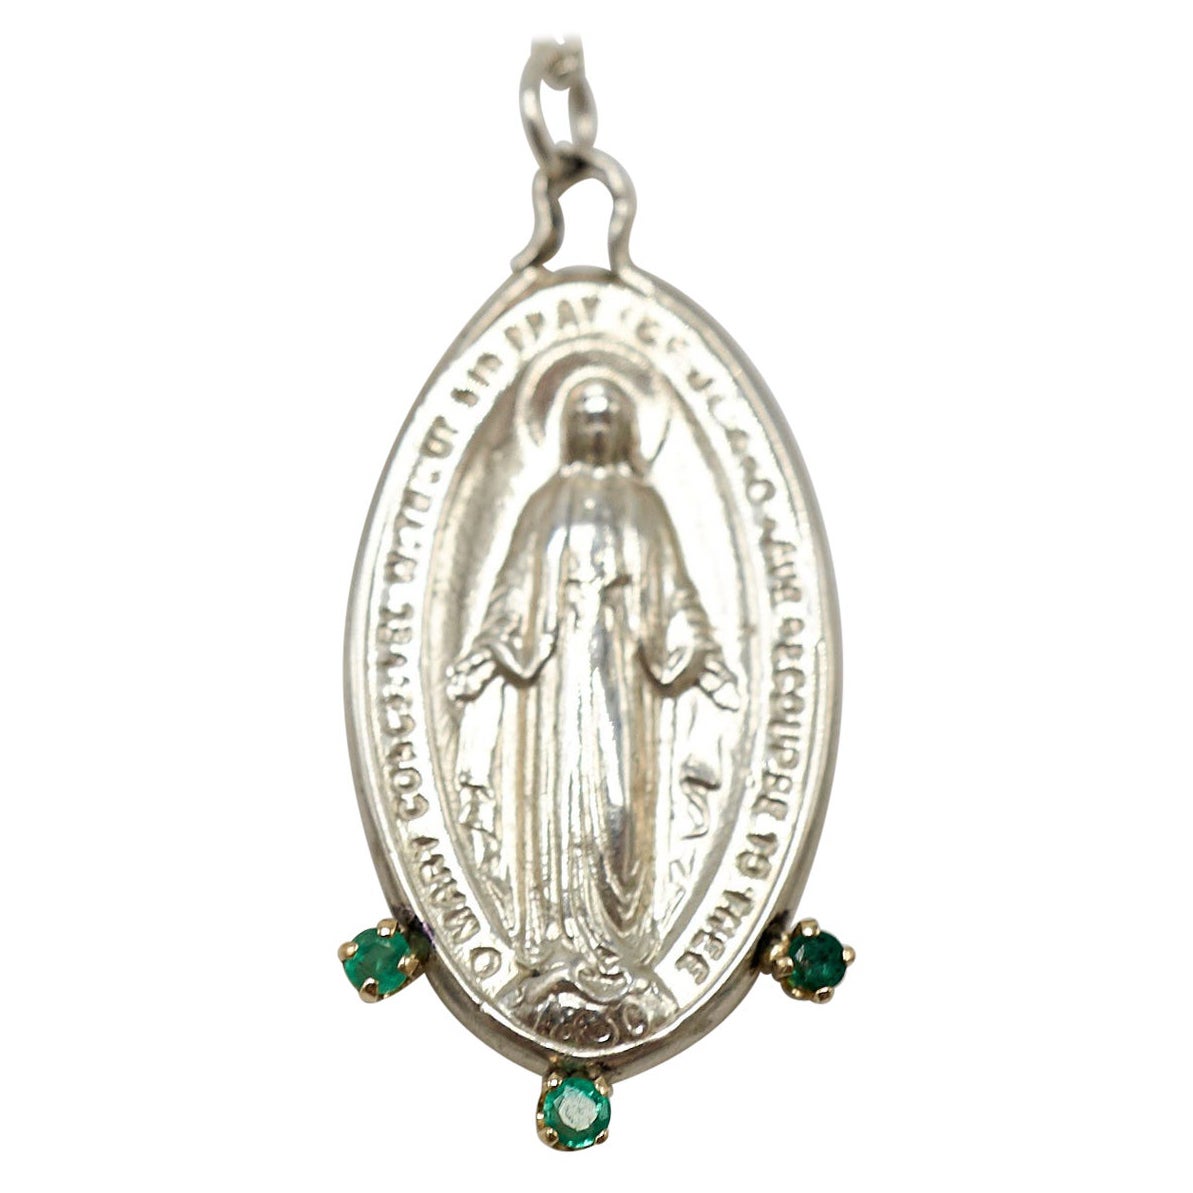 Virgin Mary Medal Oval Pendant Emeralds Silver Chain Necklace J Dauphin For Sale